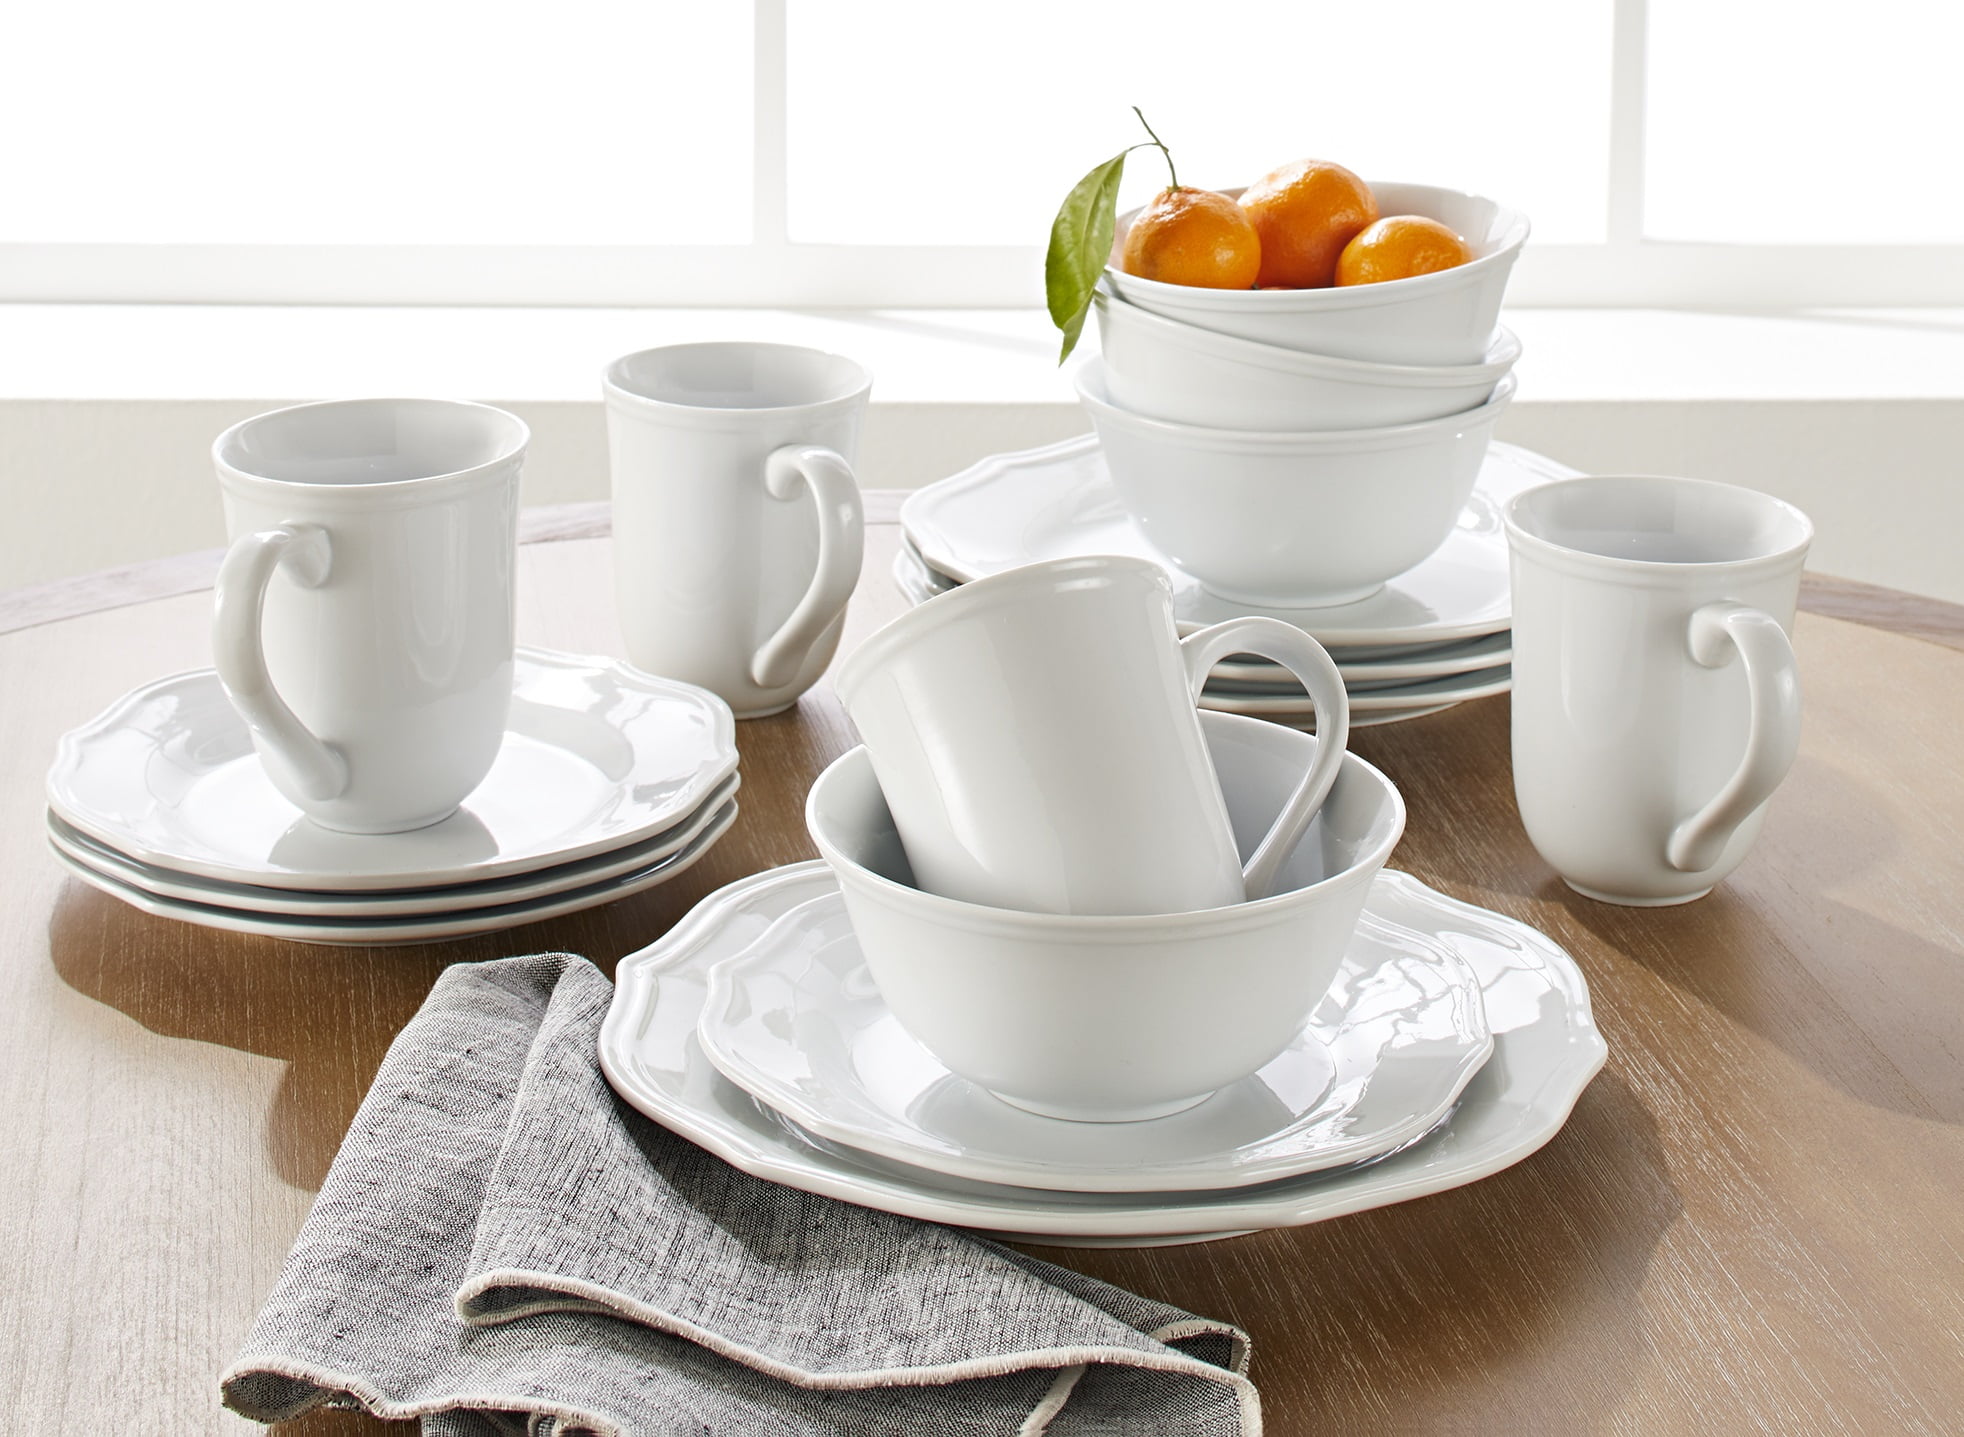 Dinnerware Set Service for 2 Wedding Housewarming Gifts 6 Piece White Porcelain Scalloped Embossed Bone China 